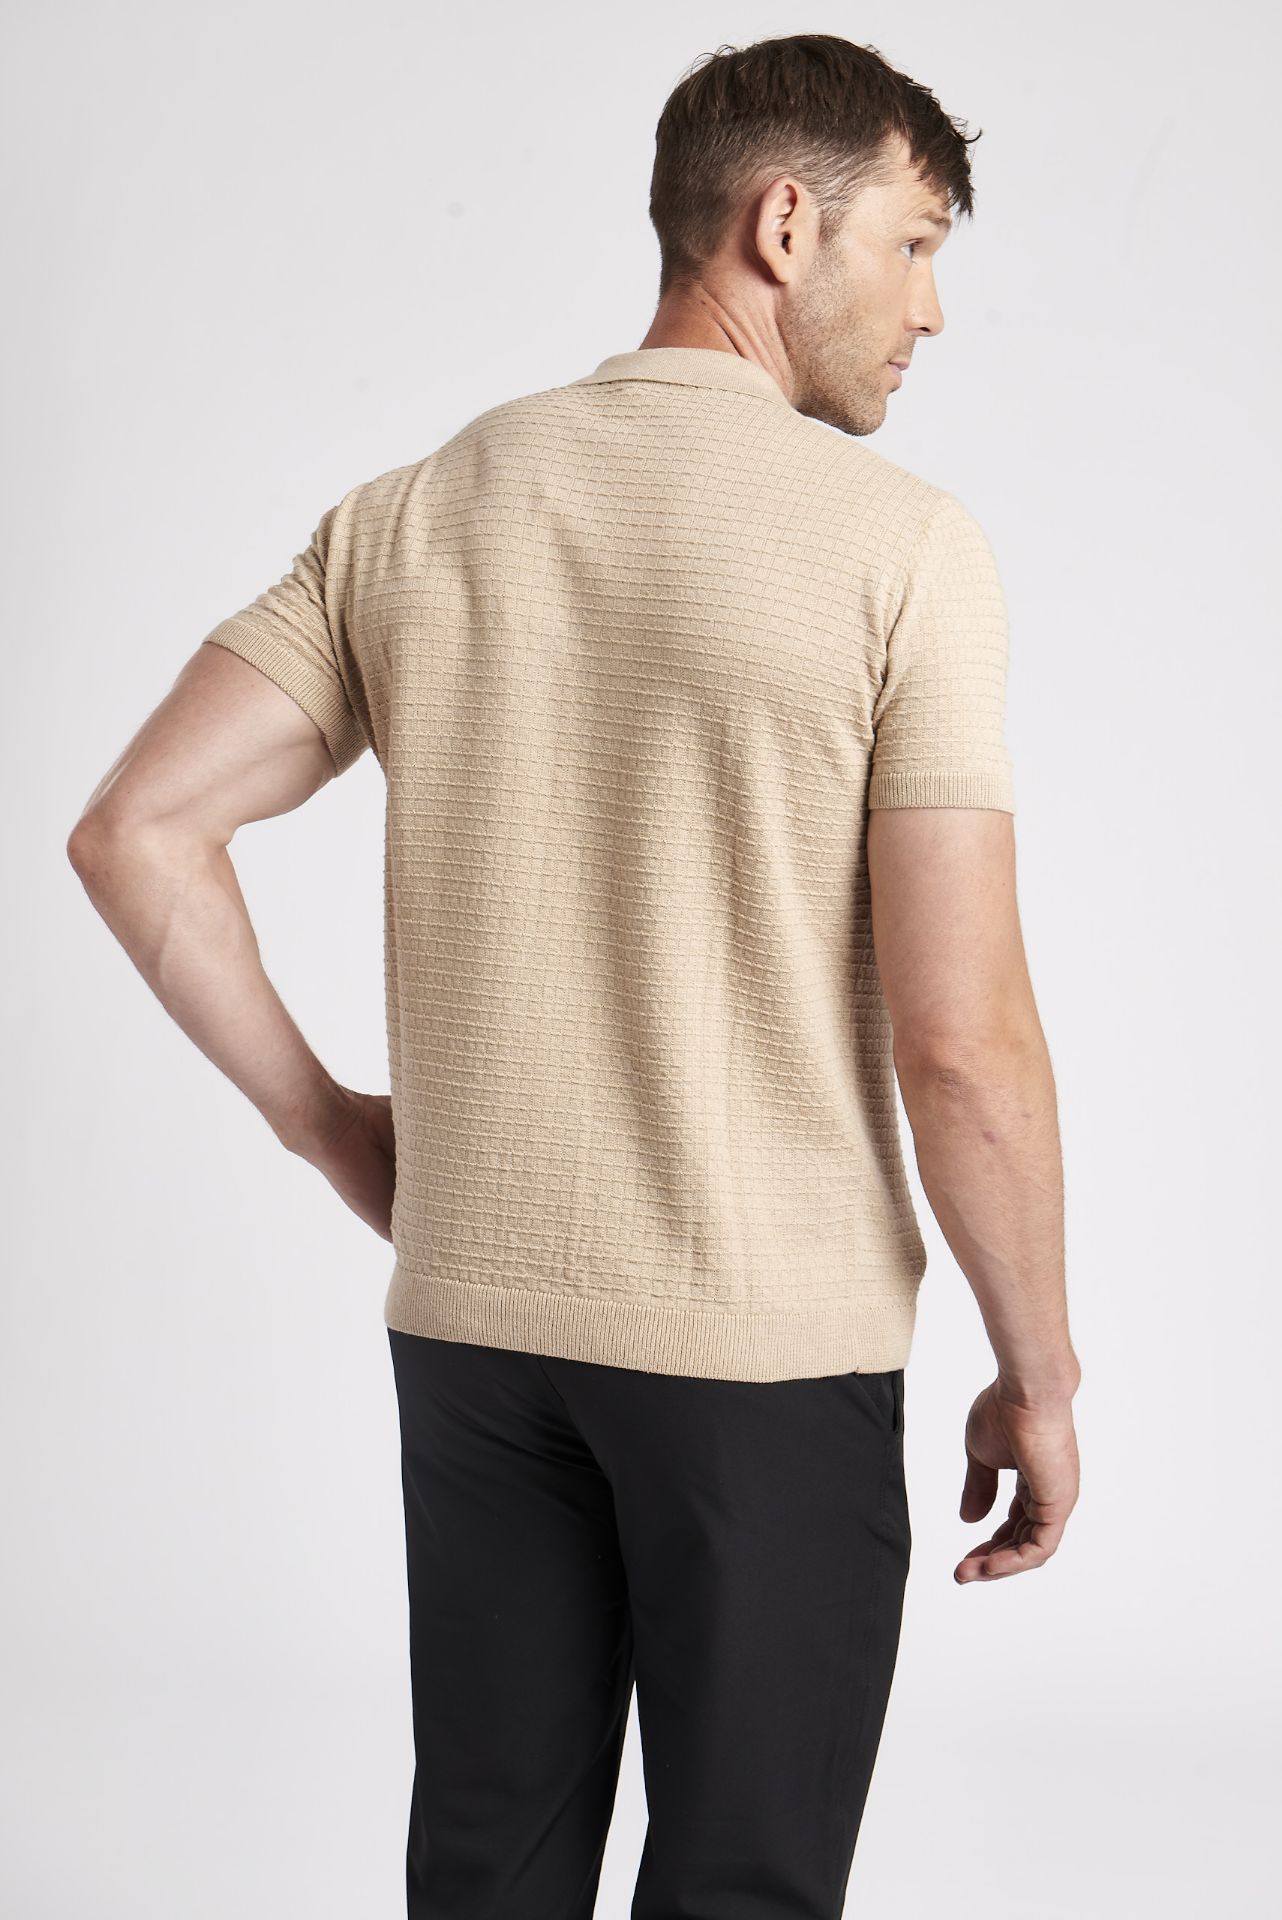 15 x Knitted Zip Polos - Image 5 of 12